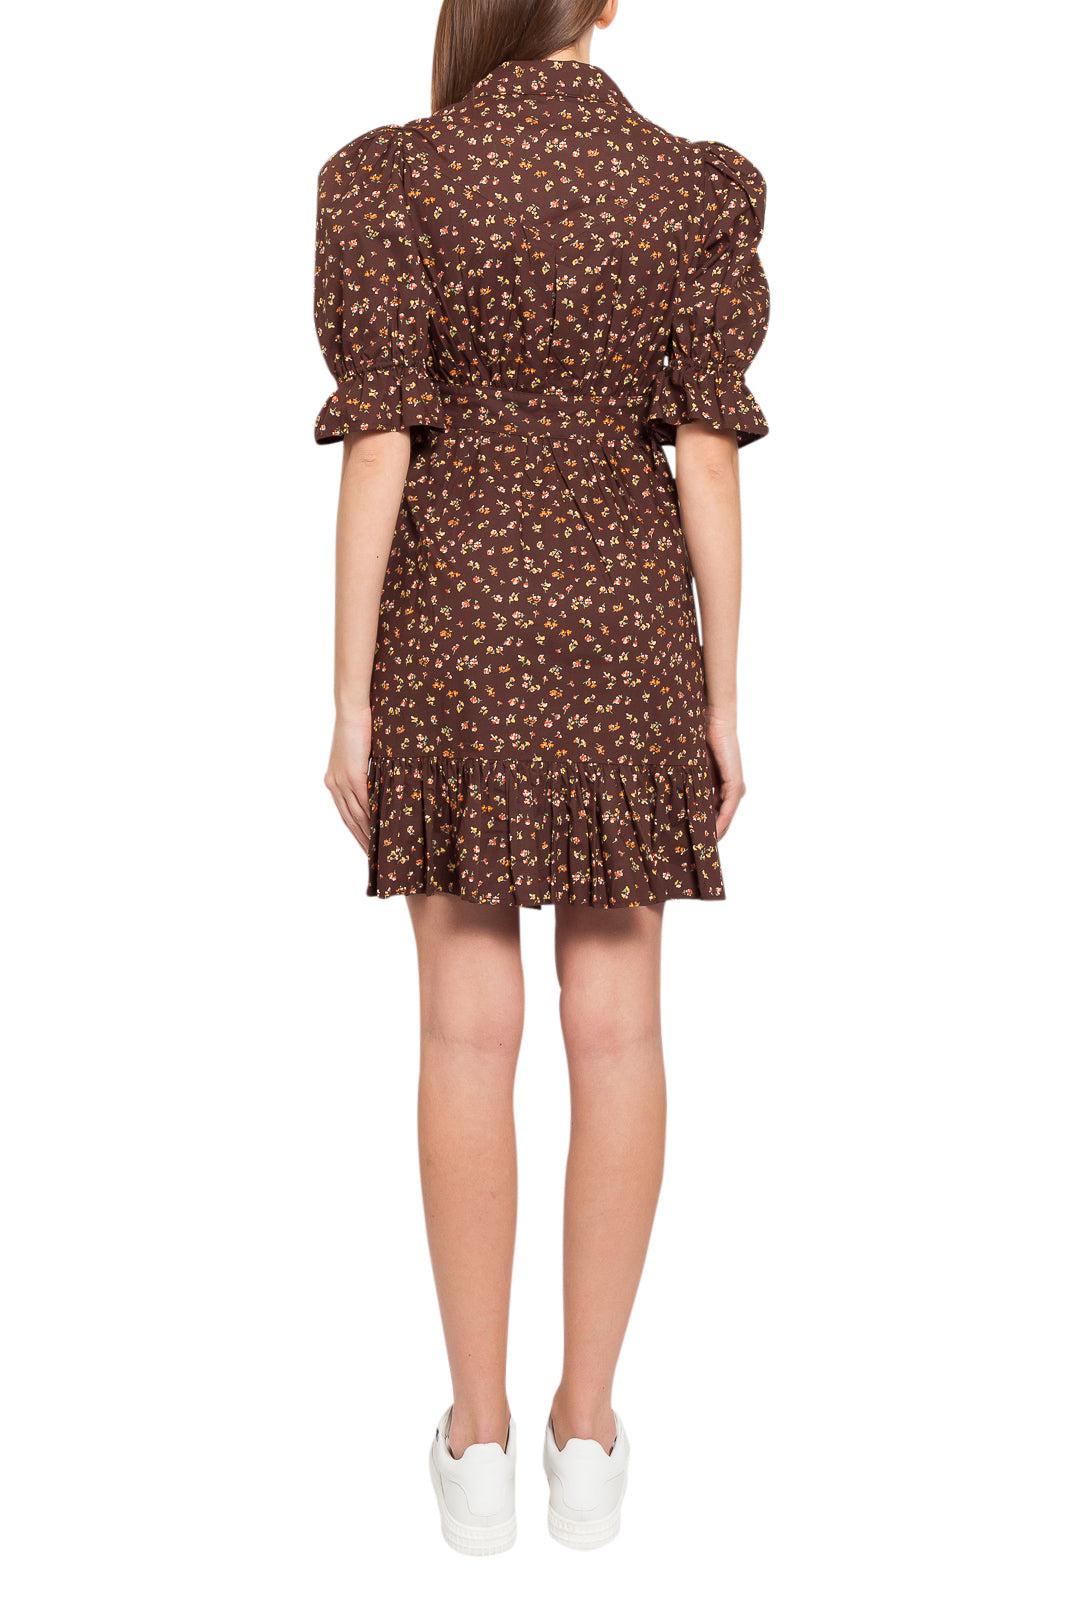 By Timo-Floral pattern flared mini-dress-dgallerystore